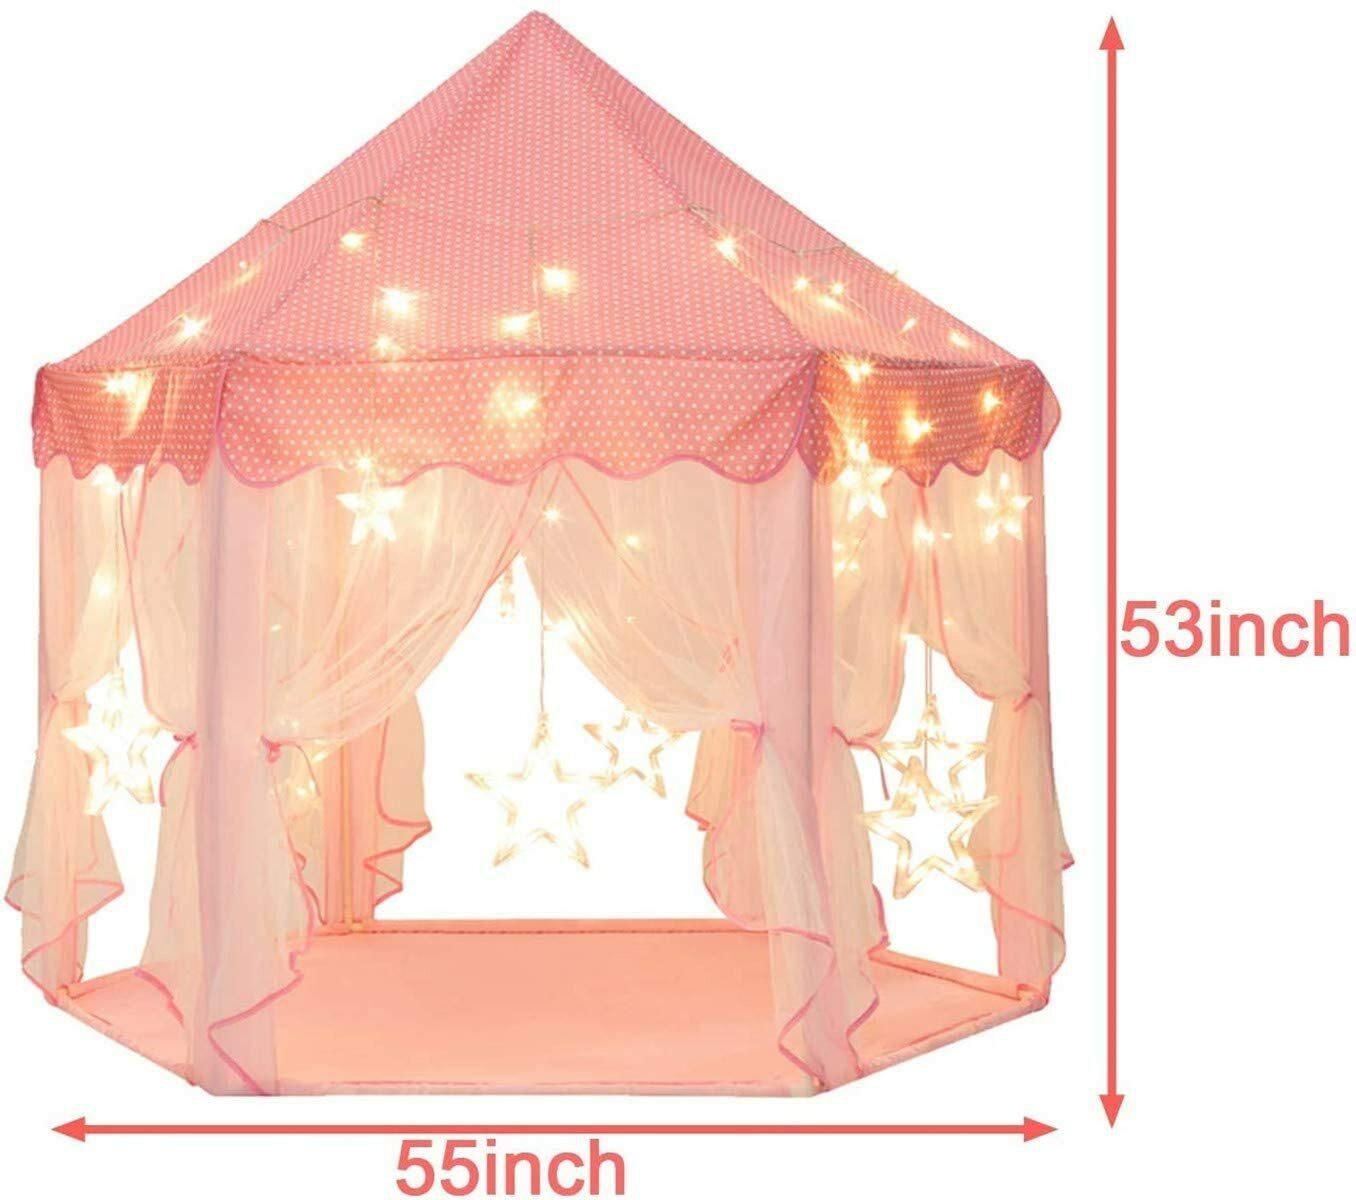 Generic Mumoo Bear Princess Castle Tent For Girls Fairy Play Tents For Kids Hexagon Playhouse For Children Or Toddlers Indoor Or Outdoor Games (Pink)